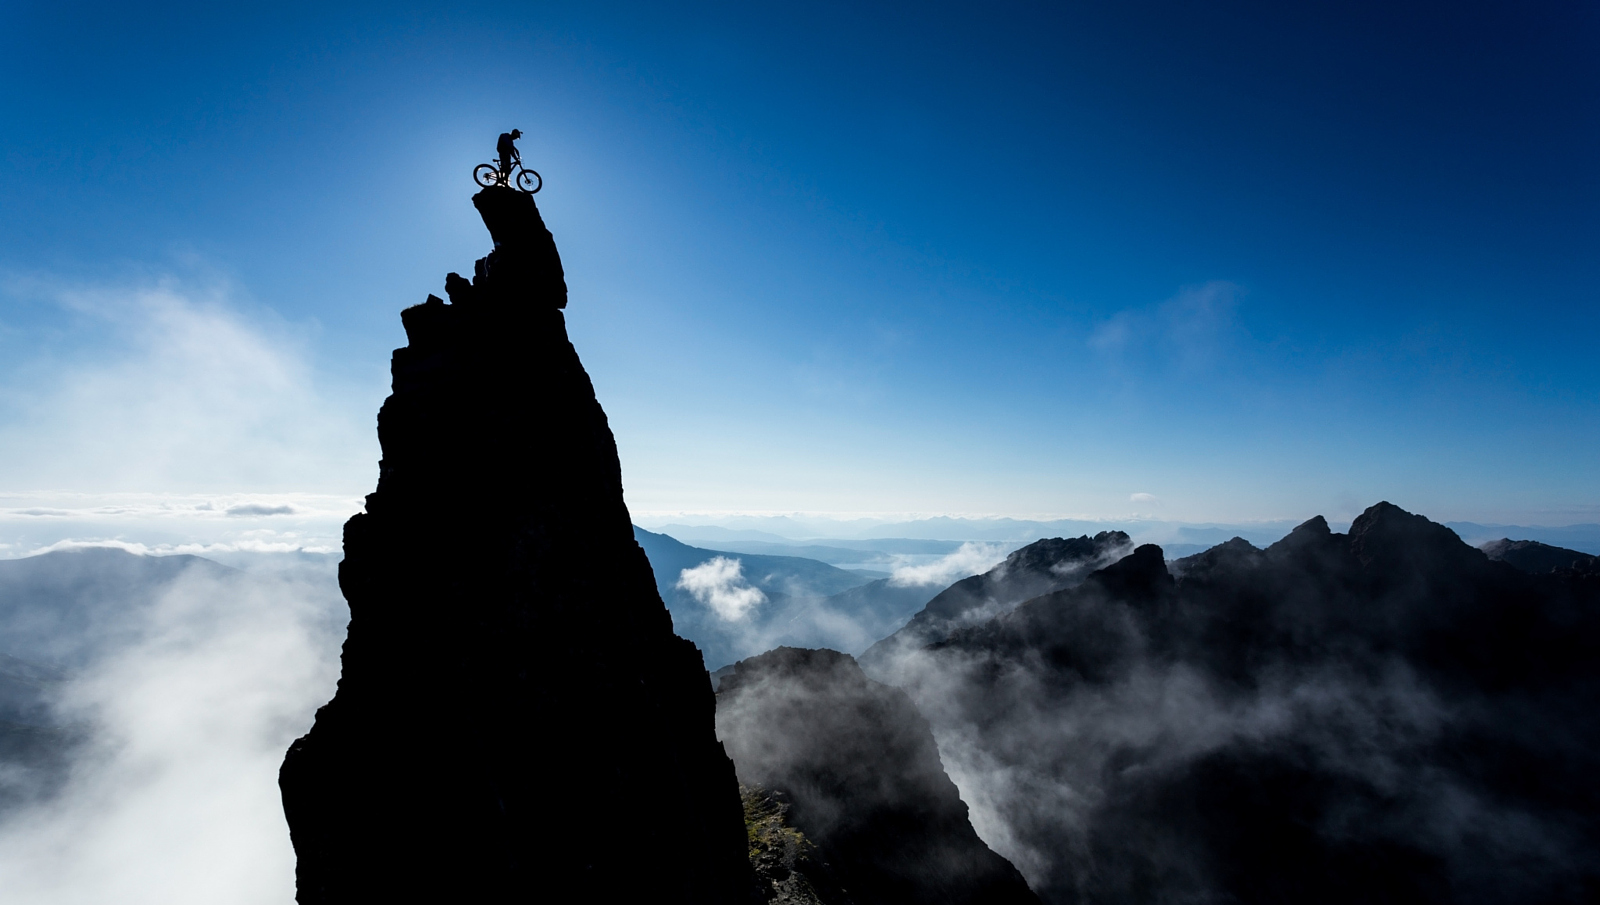 The Most Incredible Mountain Bike Photo on 500px Has a Video to Match